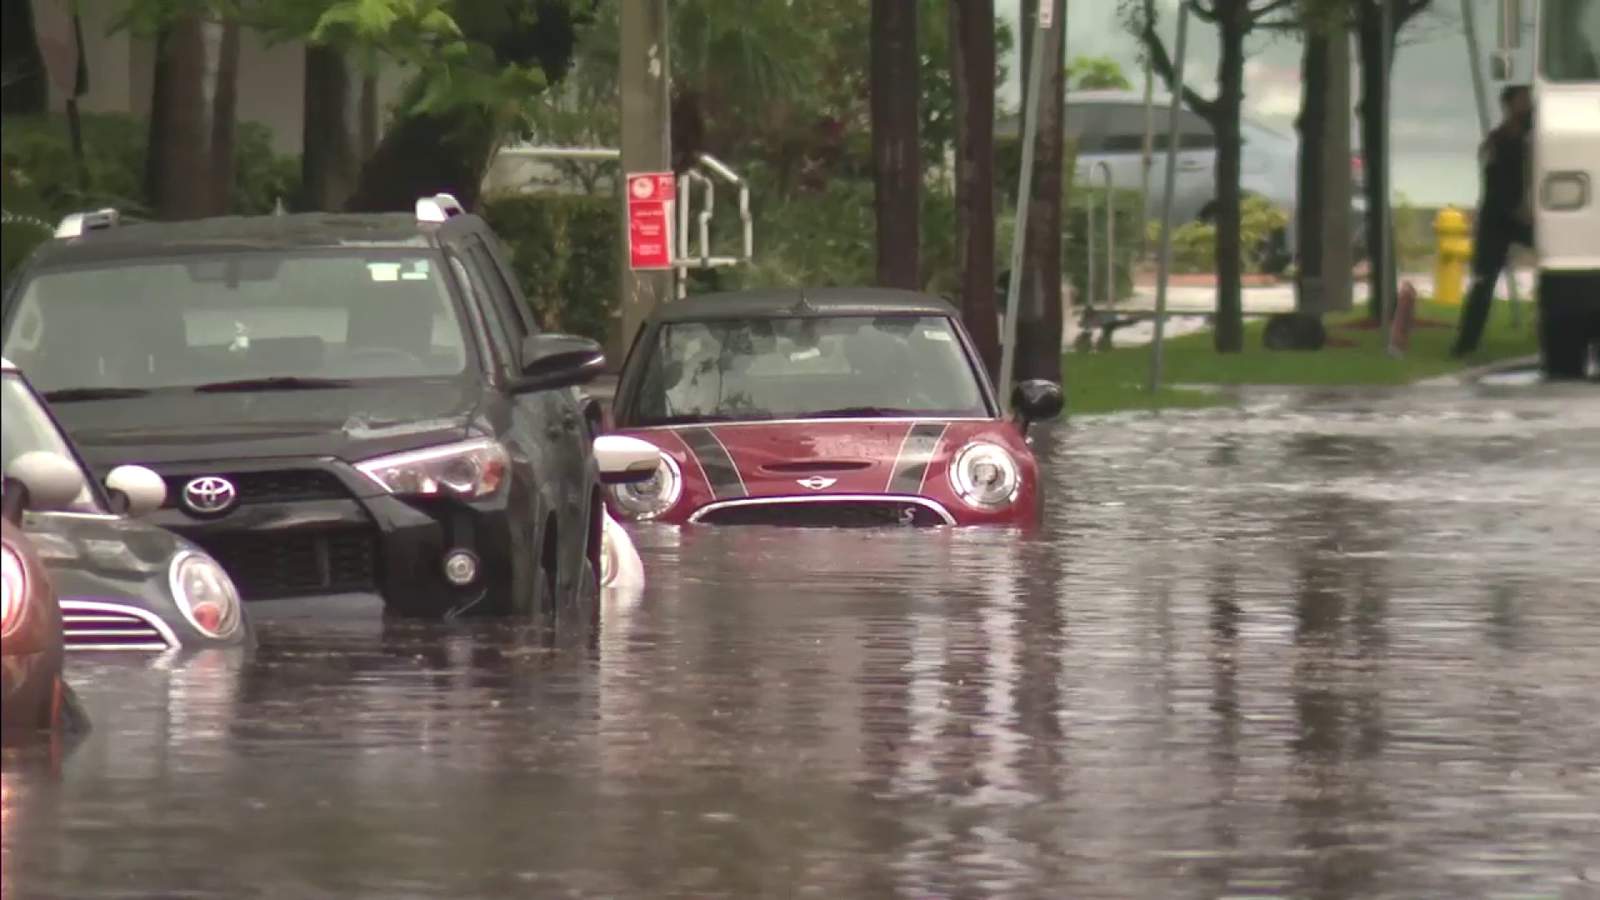 Heavy rain brings flash floods to parts of Miami-Dade and Broward, causing misery for daily commuters